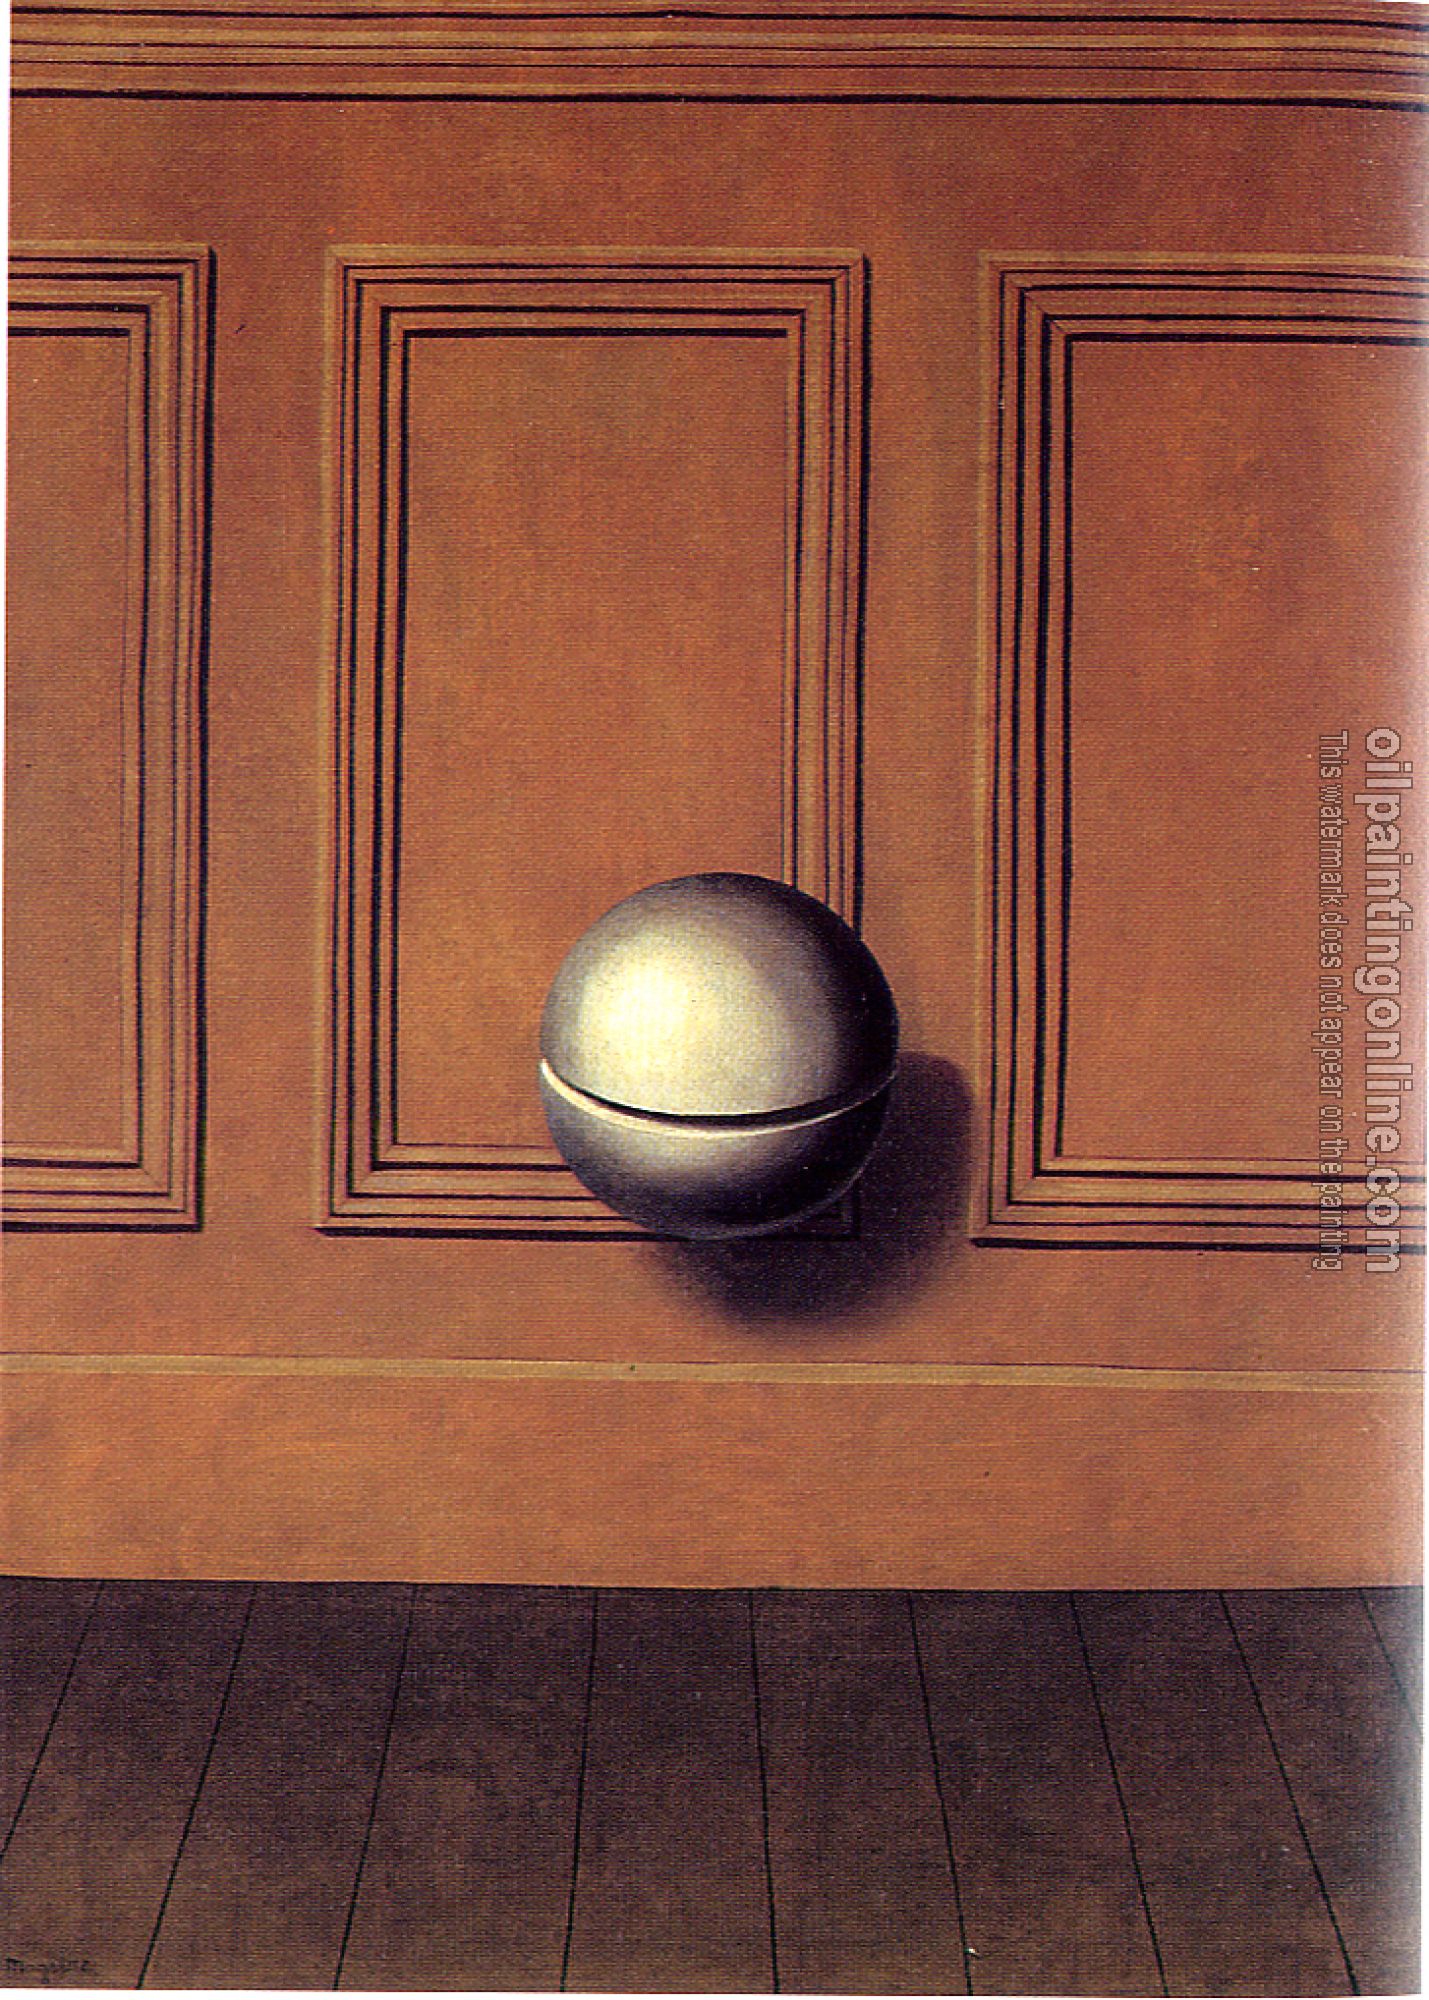 Magritte, Rene - the automaton